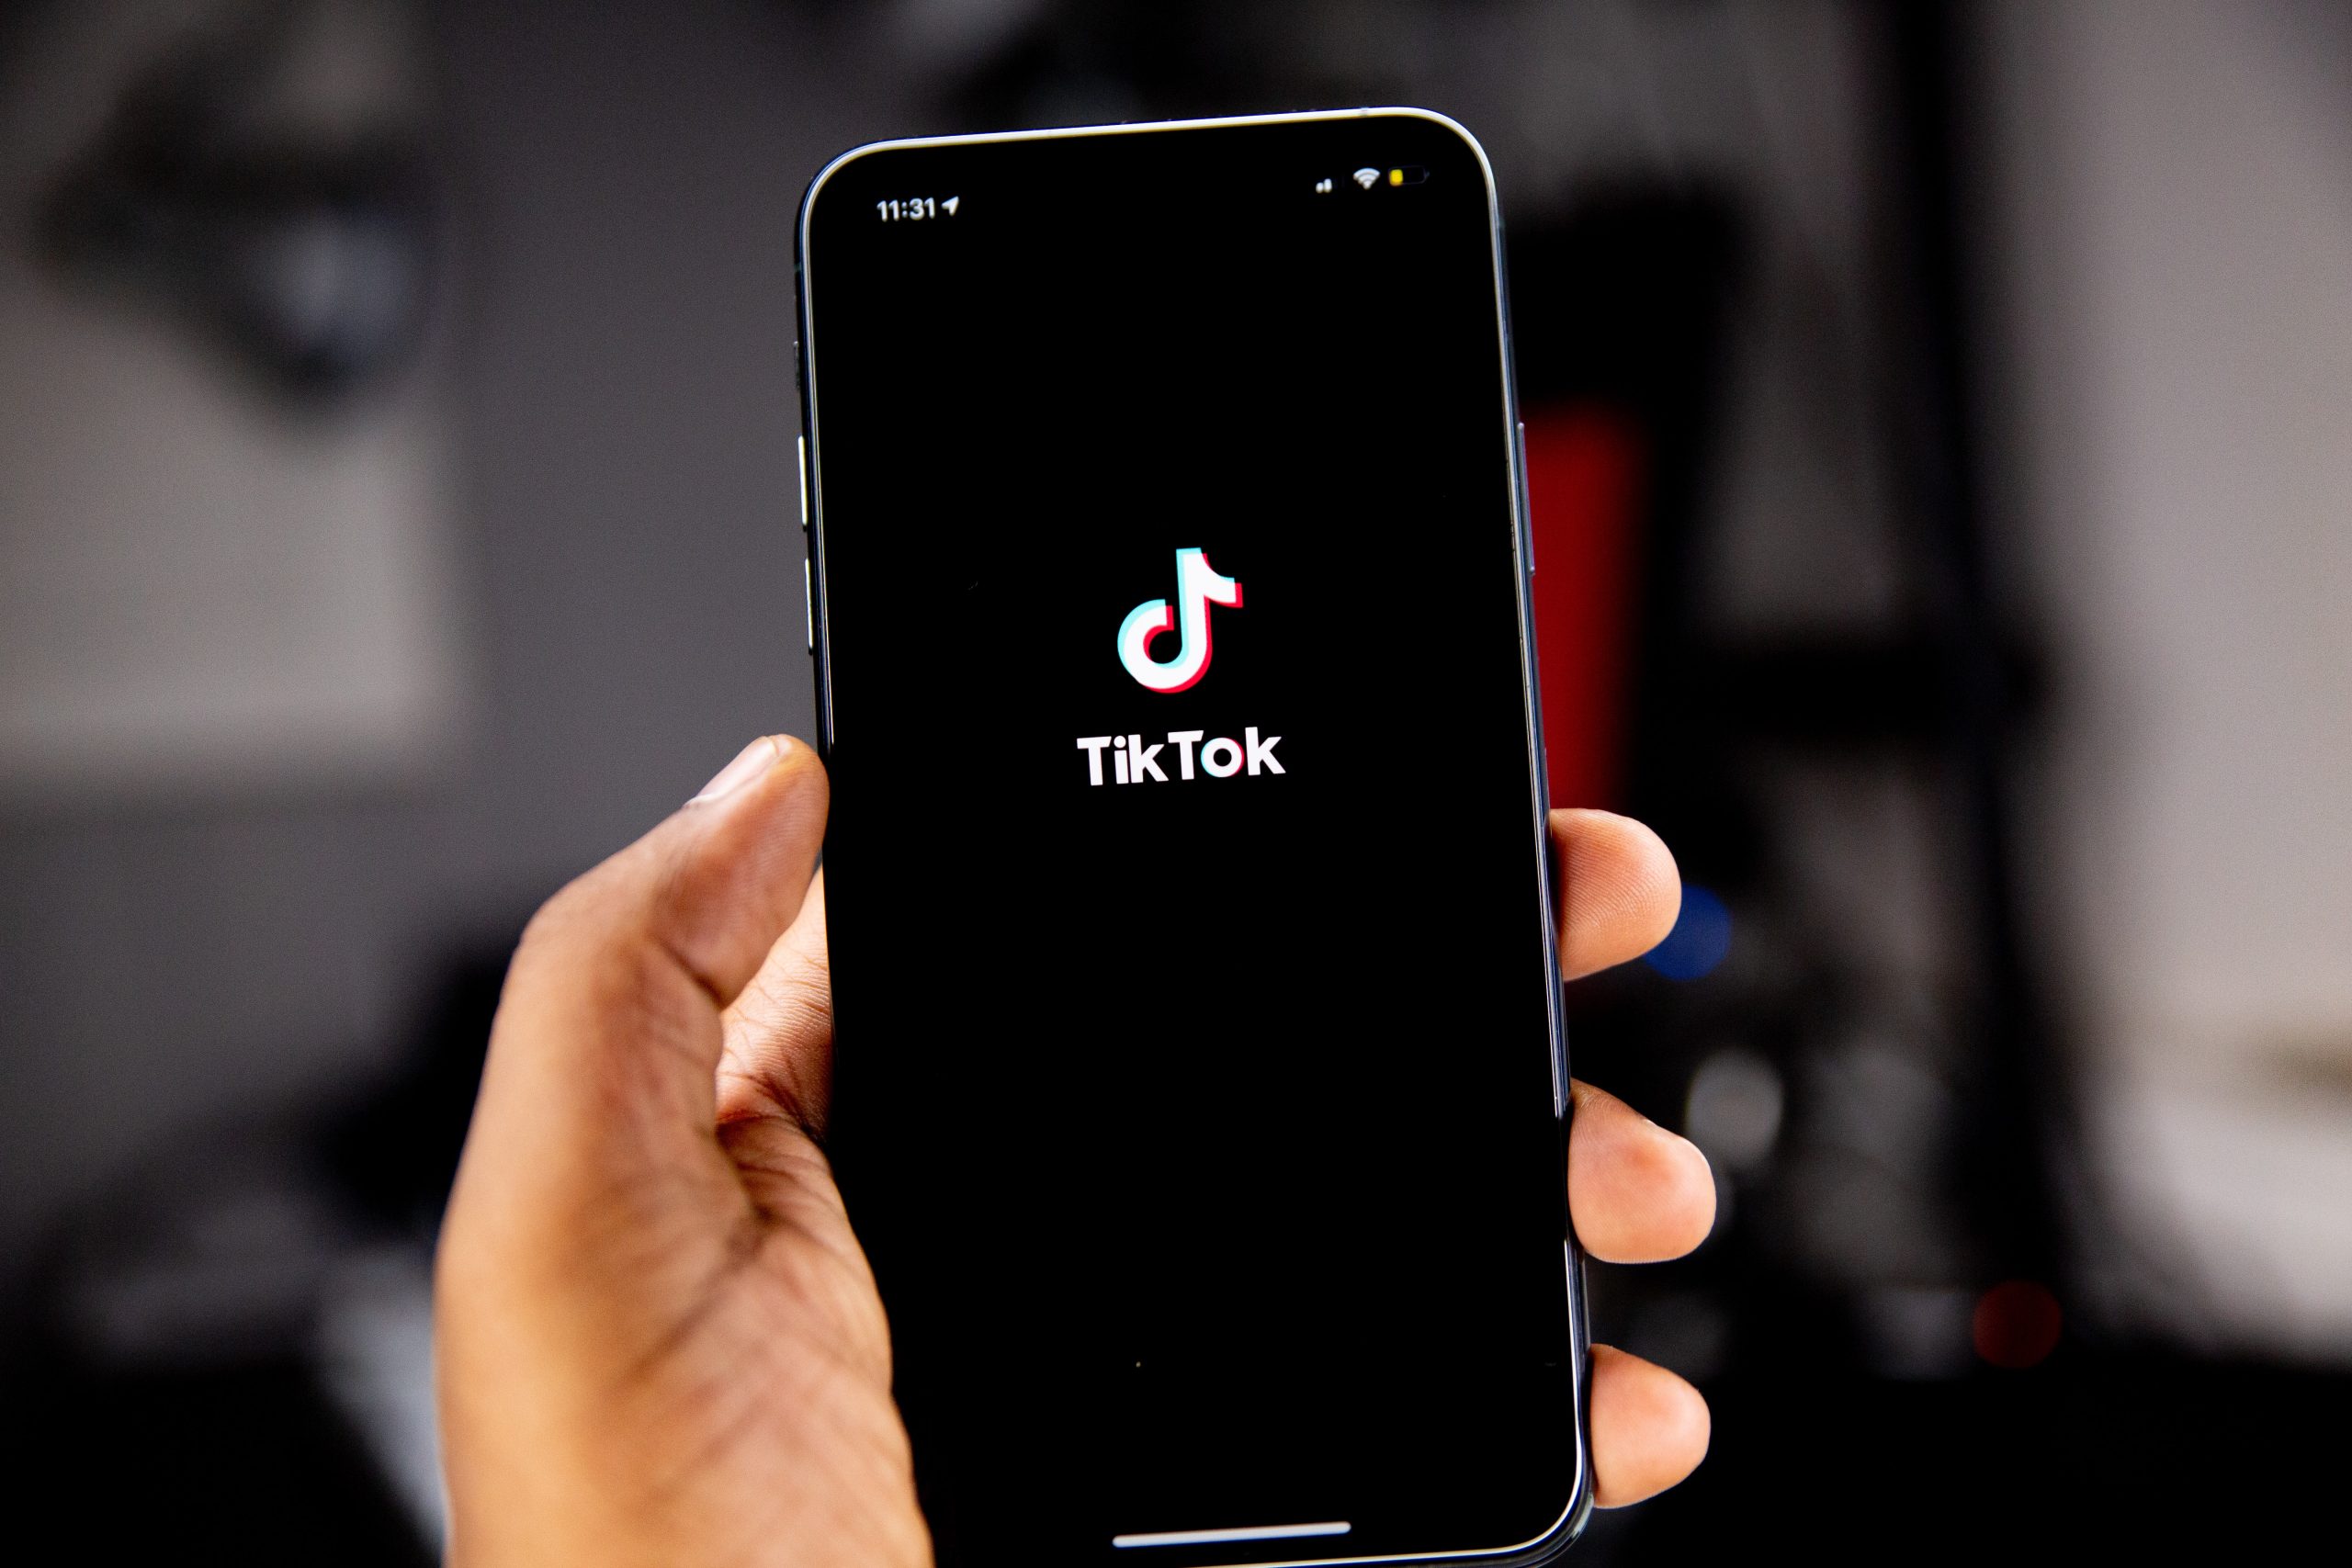 NEWS | A Herefordshire school is taking action after TikTok videos were made of staff and pupils